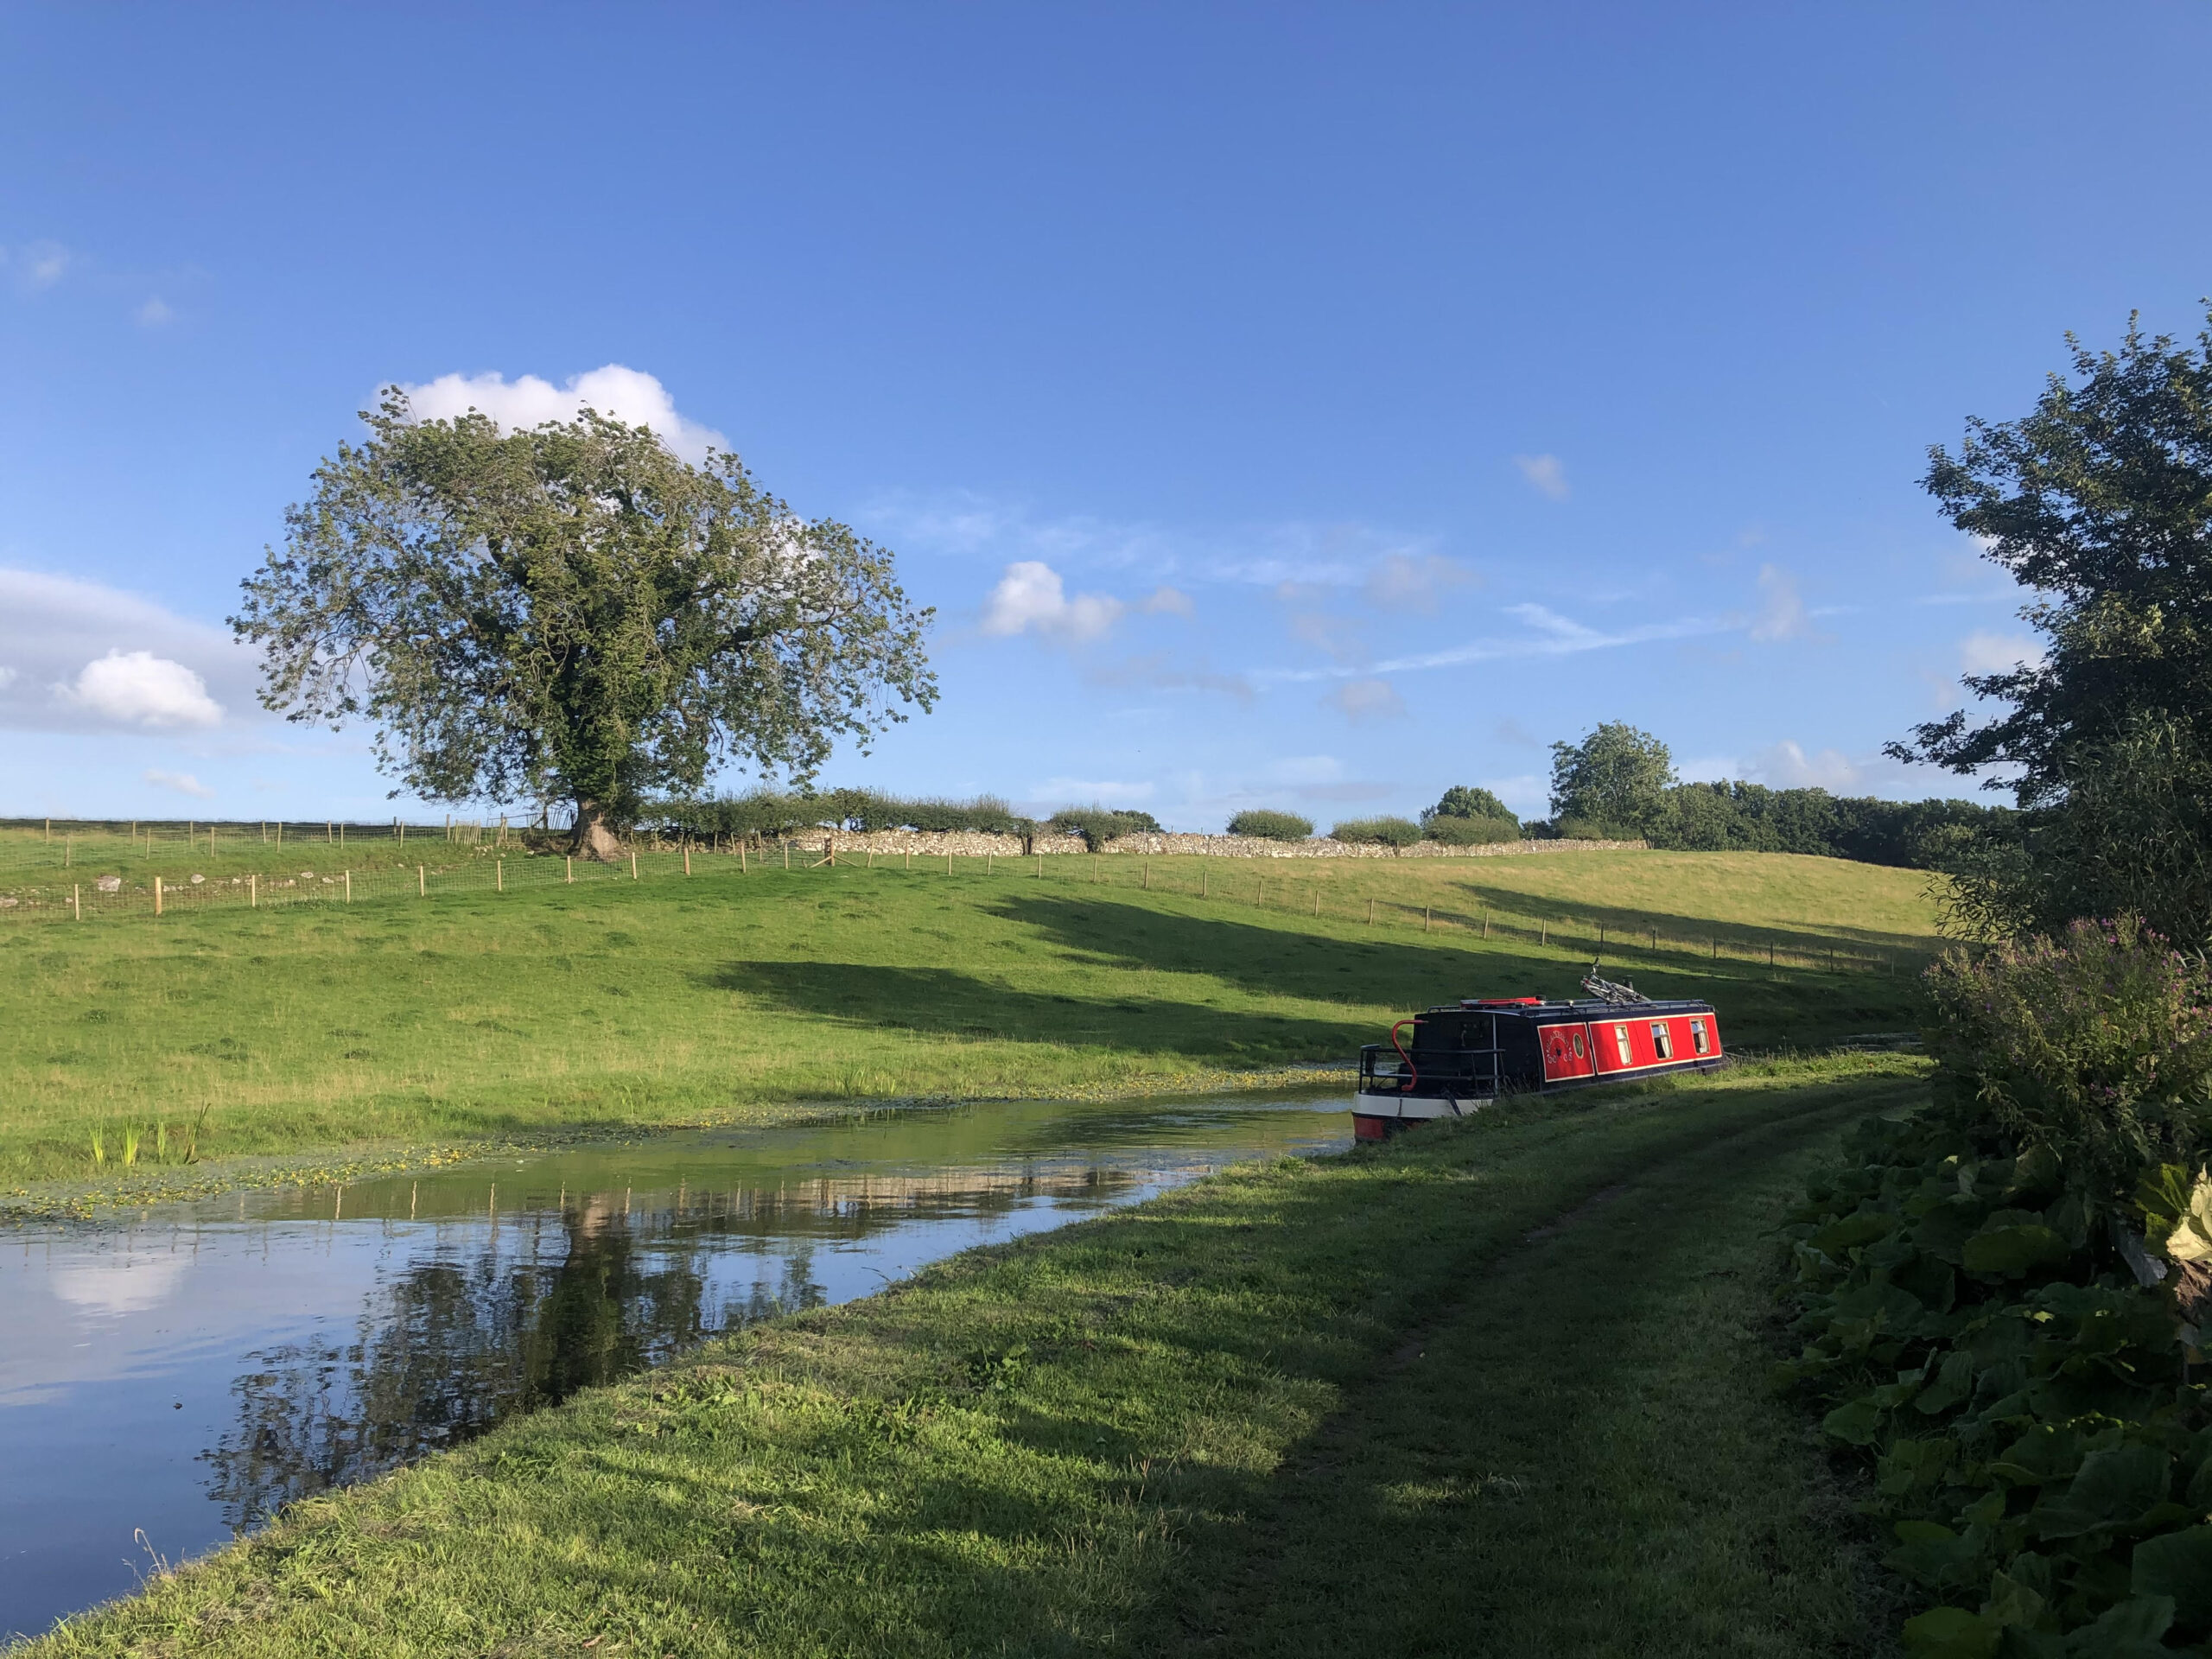 Exploring the Lancaster Canal